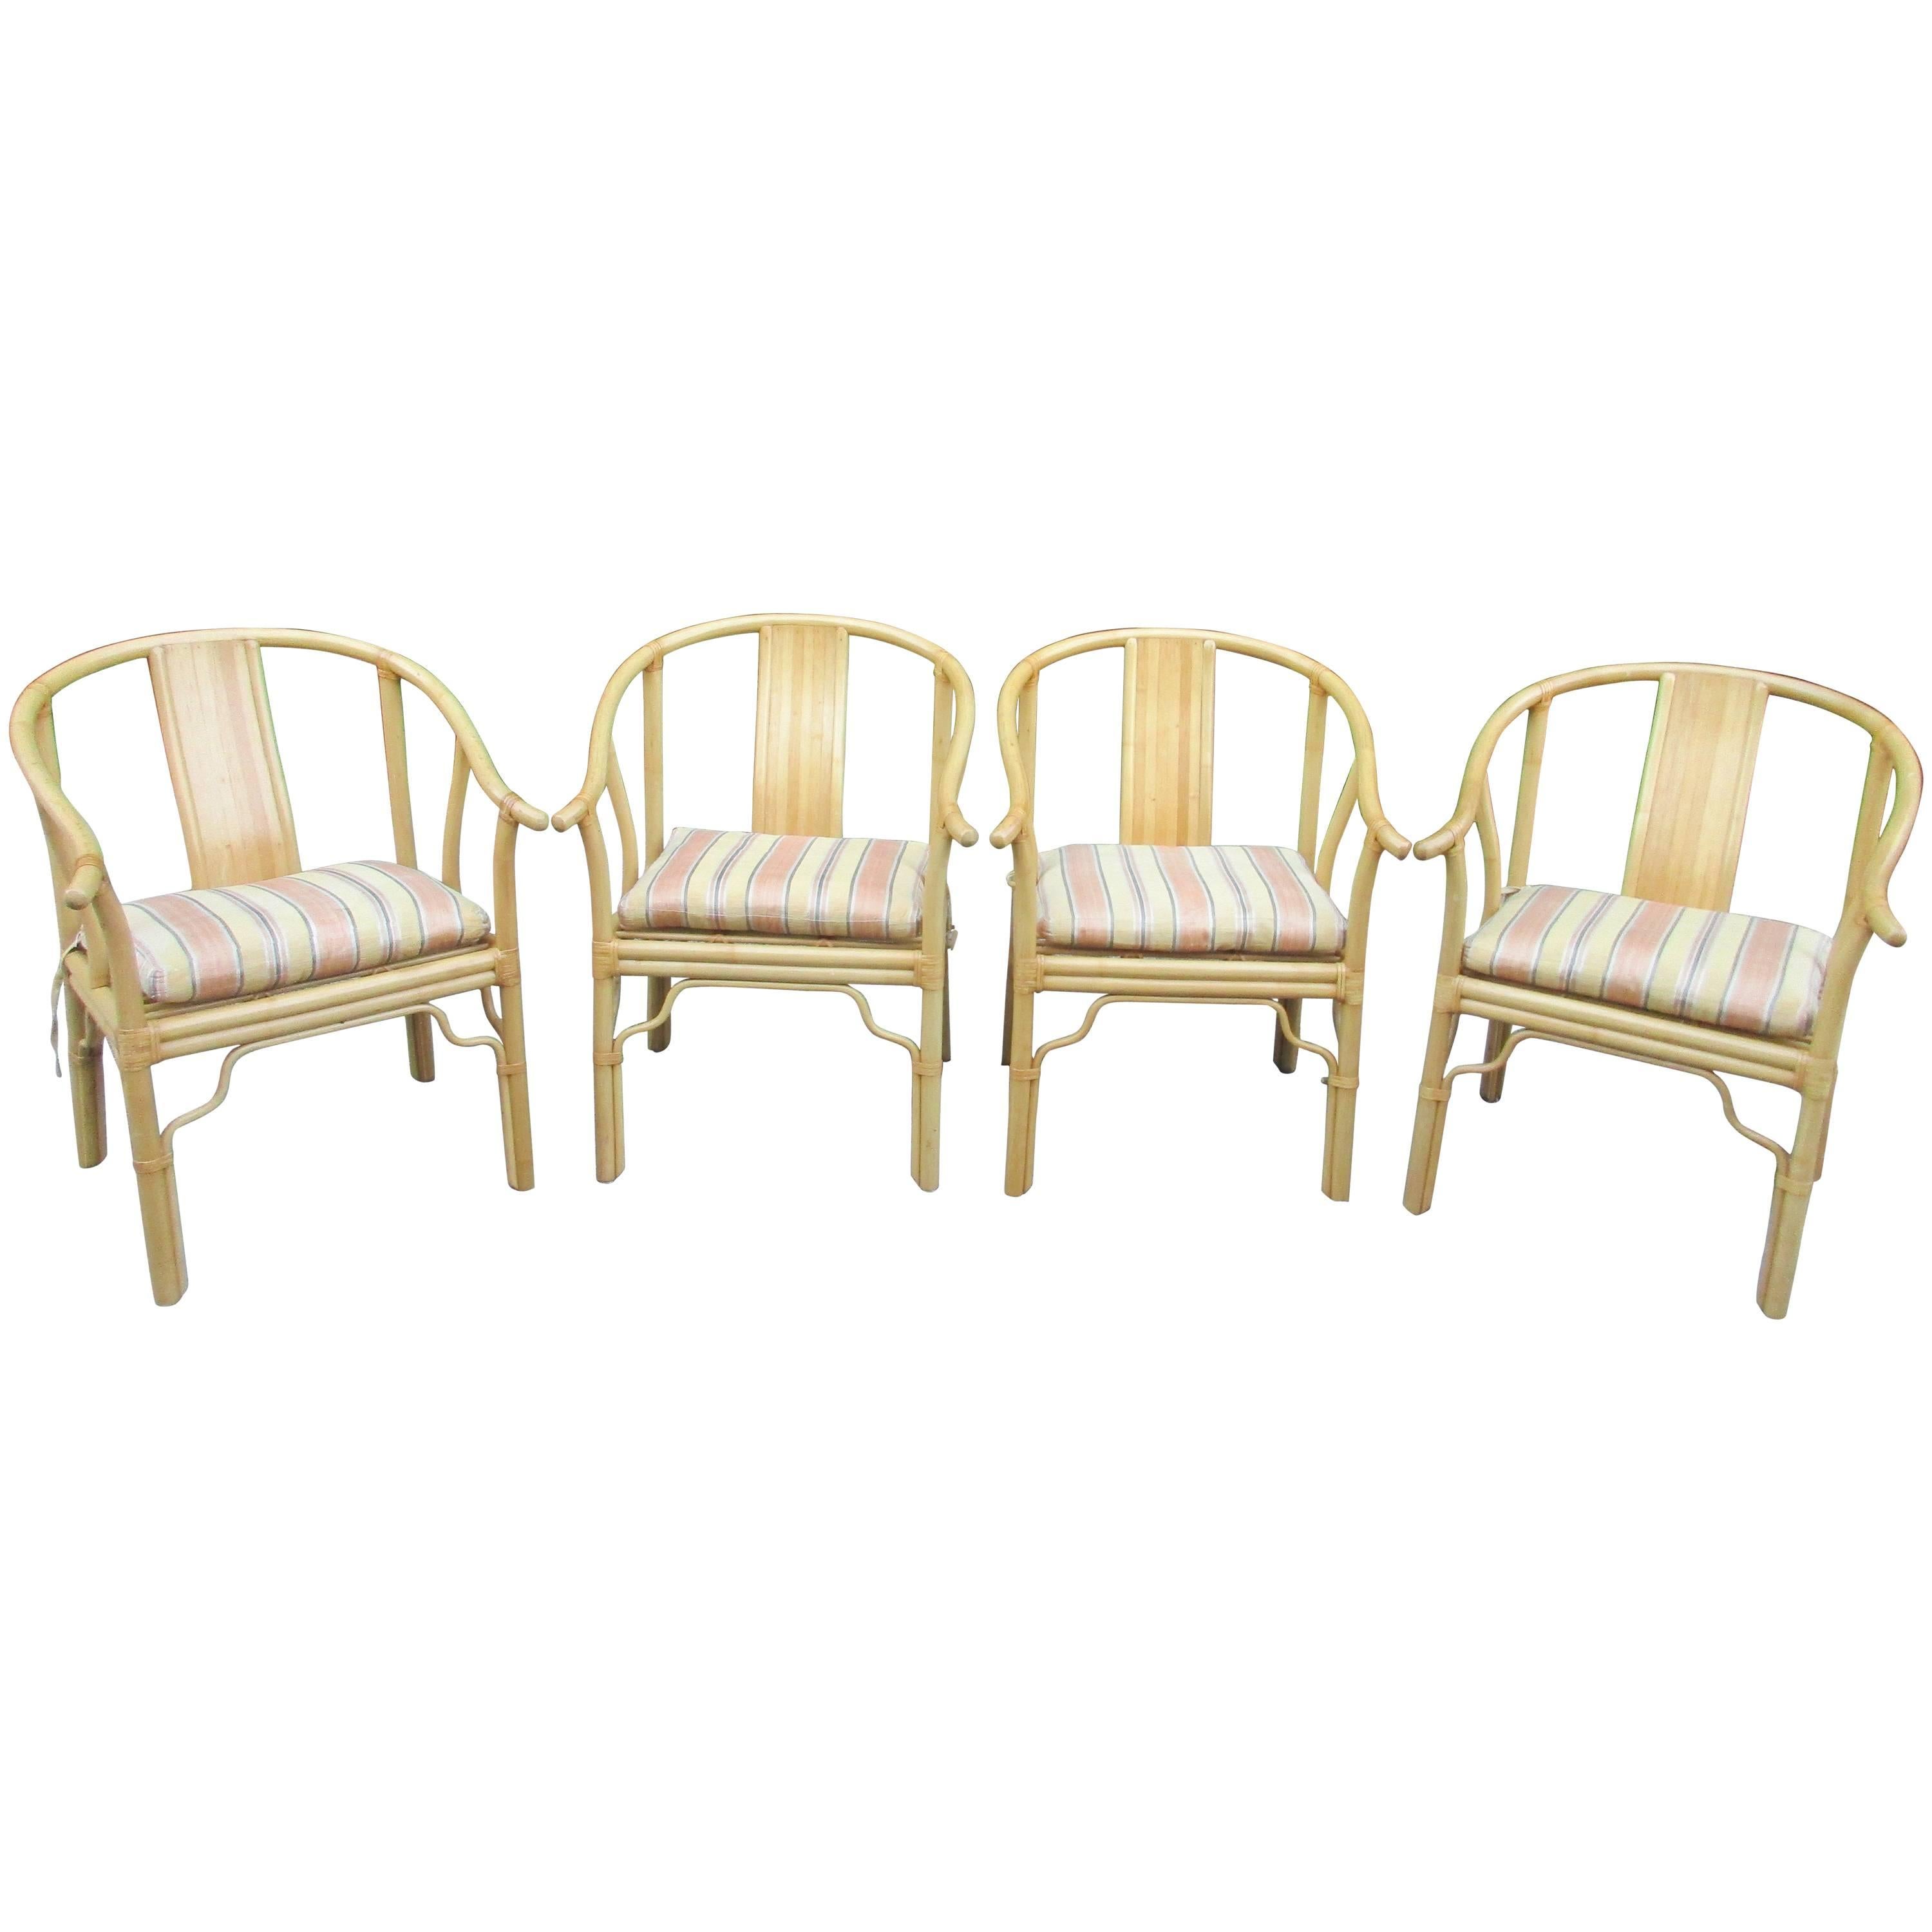 Four Vintage Bamboo Armchairs with Custom Cushions For Sale